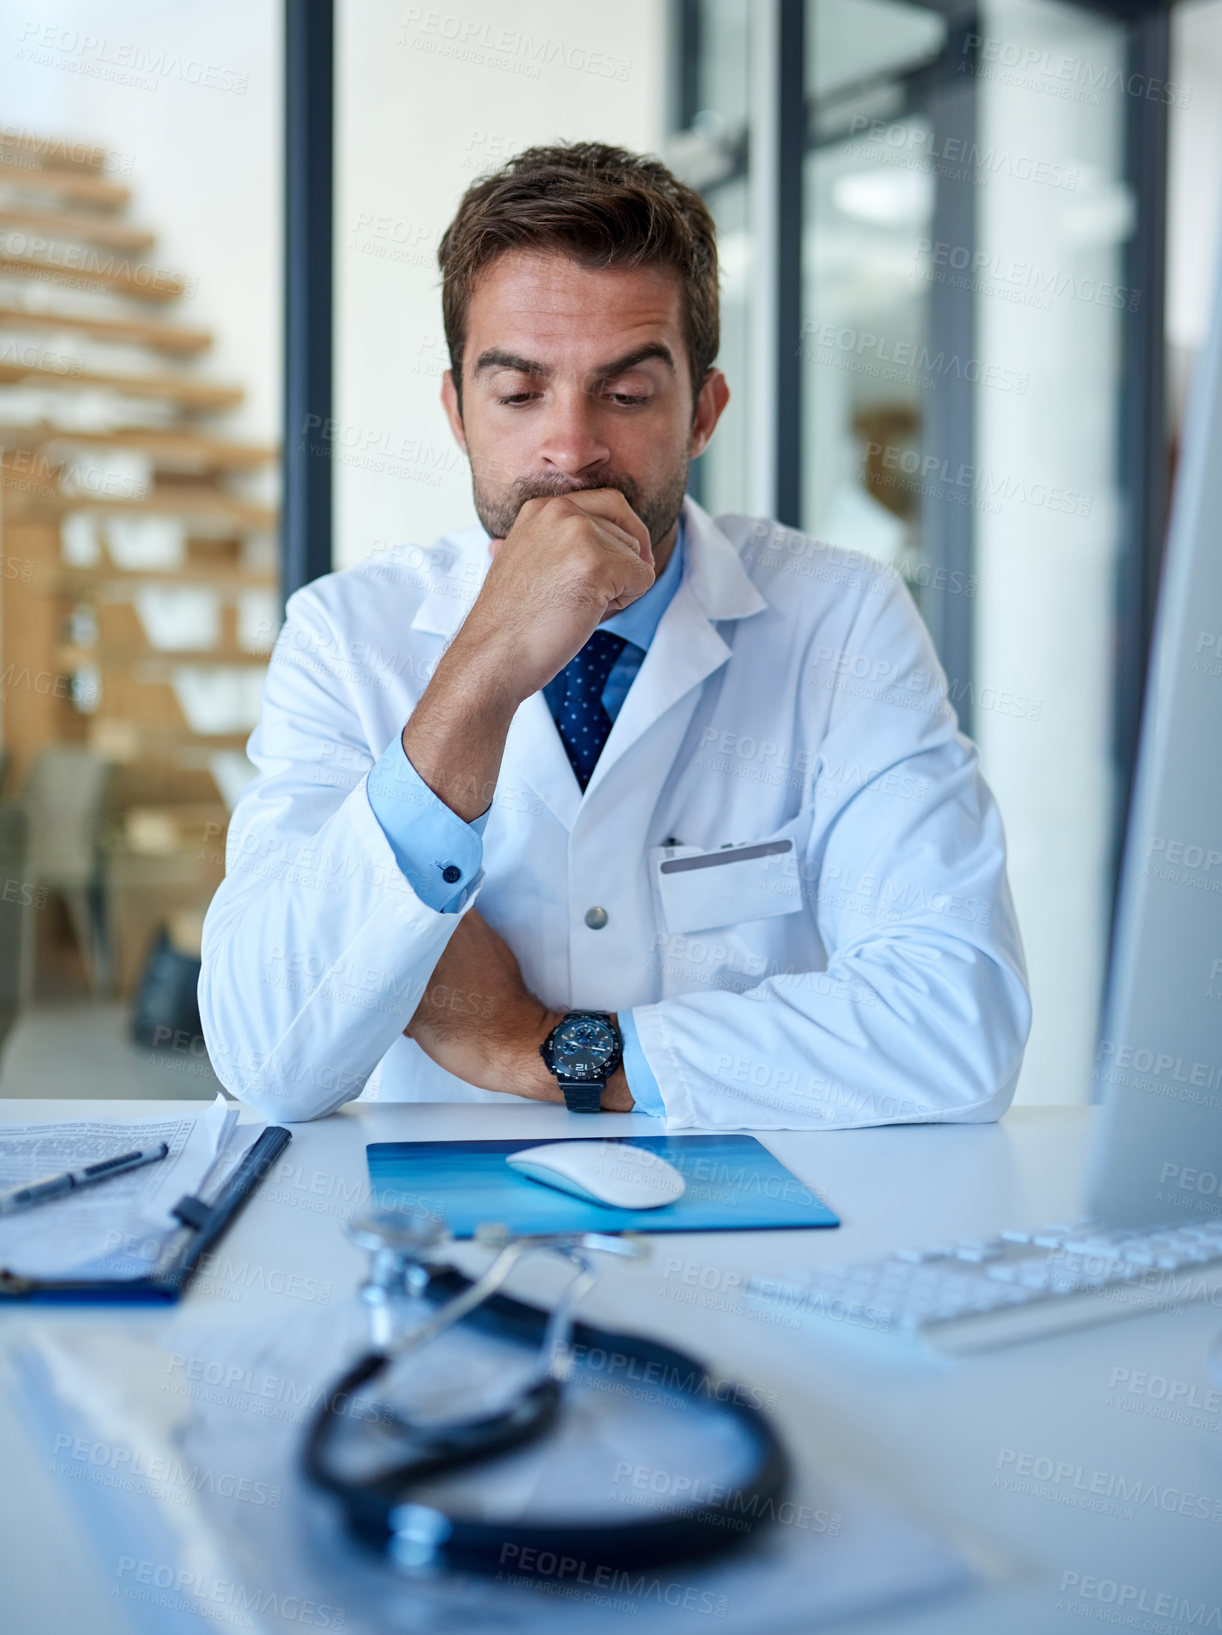 Buy stock photo Cropped shot of a young doctor looking stressed while working in his office